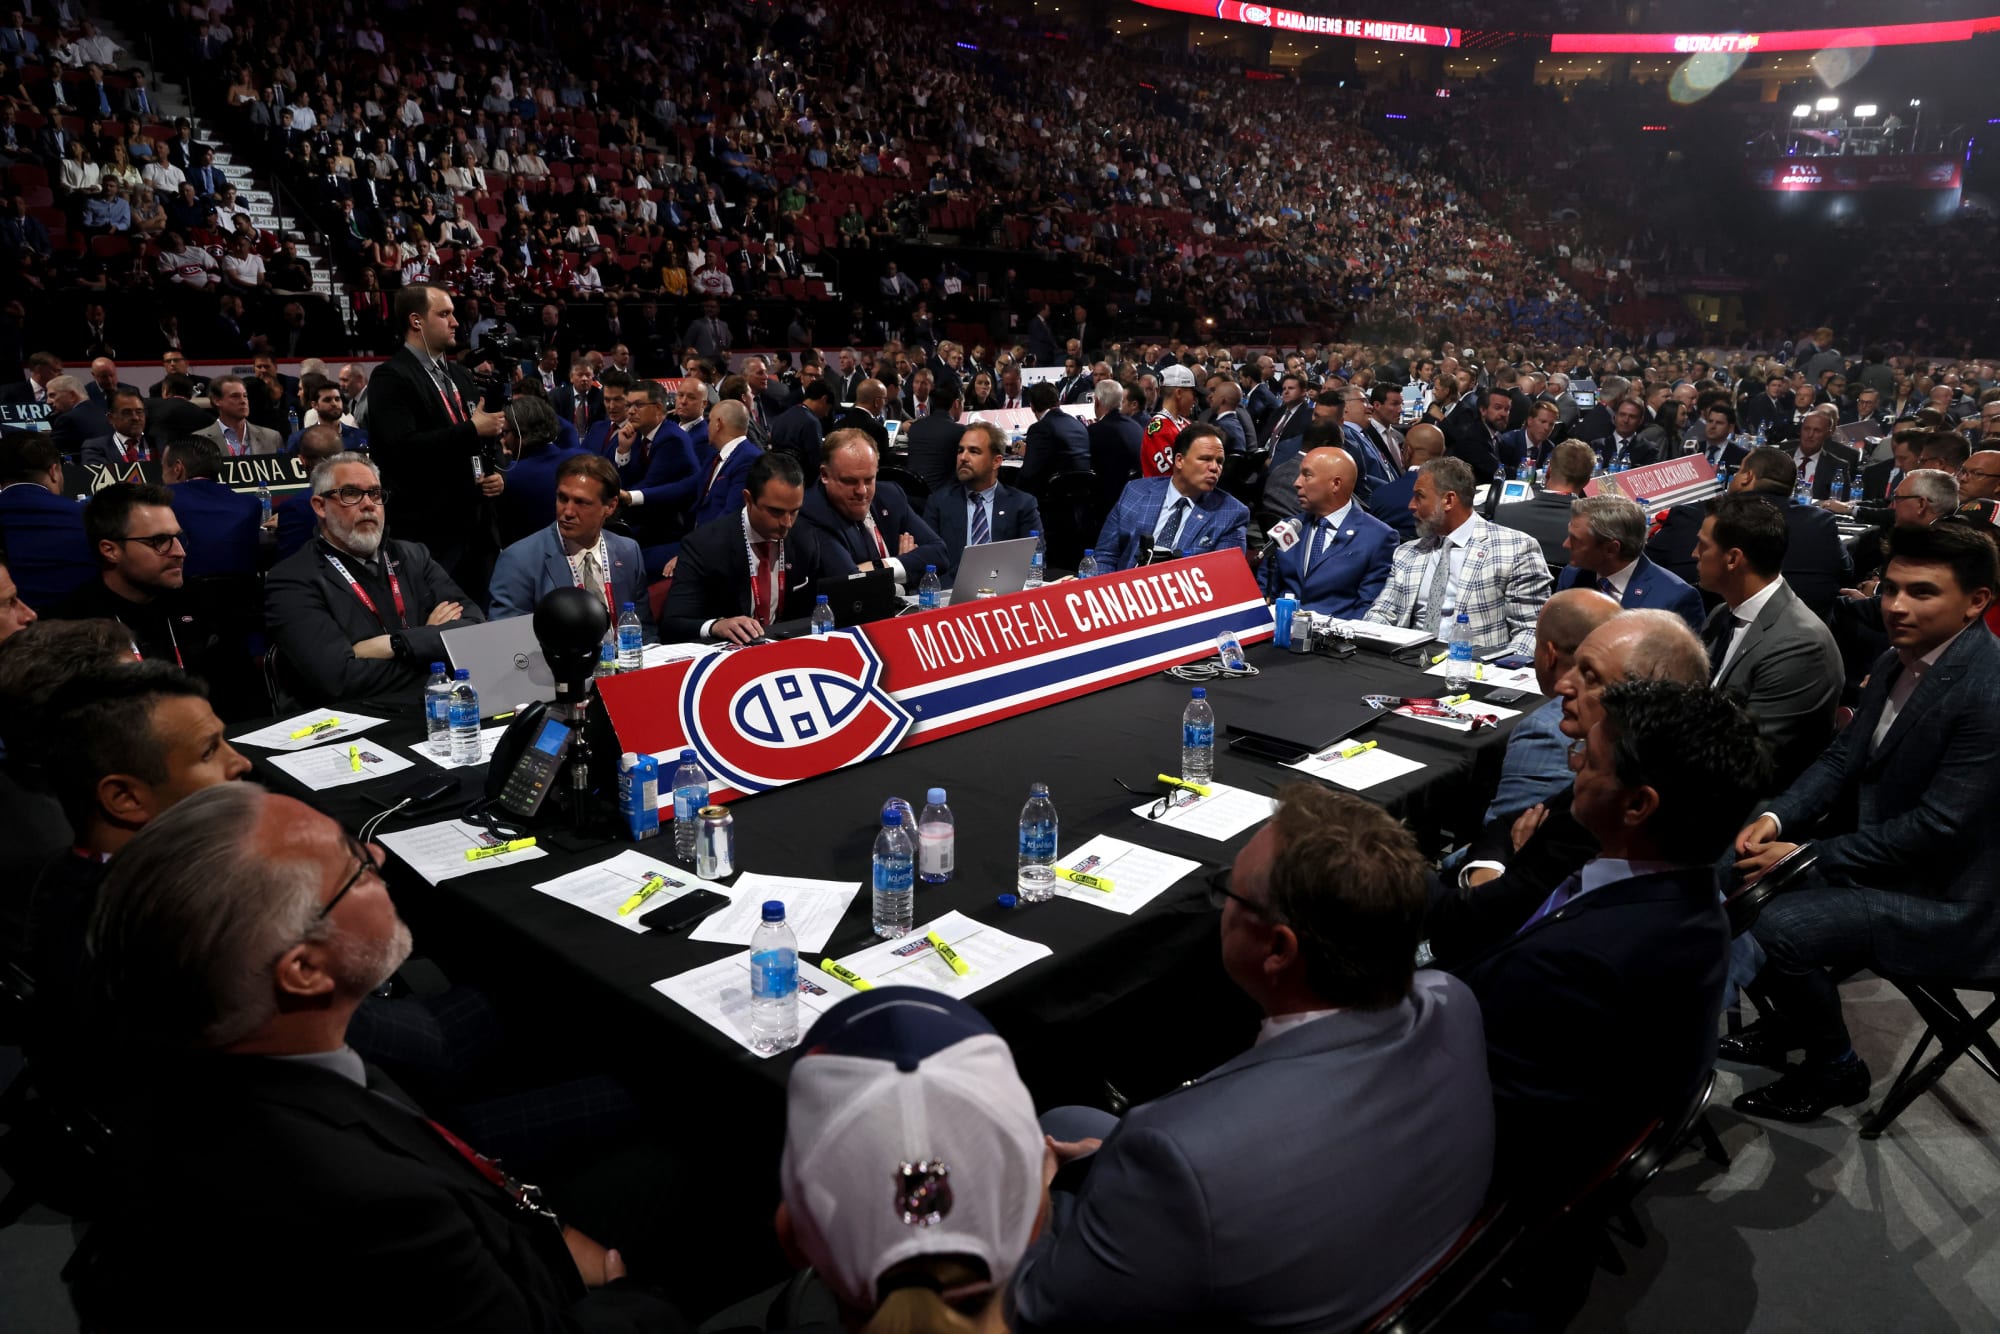 Montreal Canadiens' projected to make major moves in rebuild effort